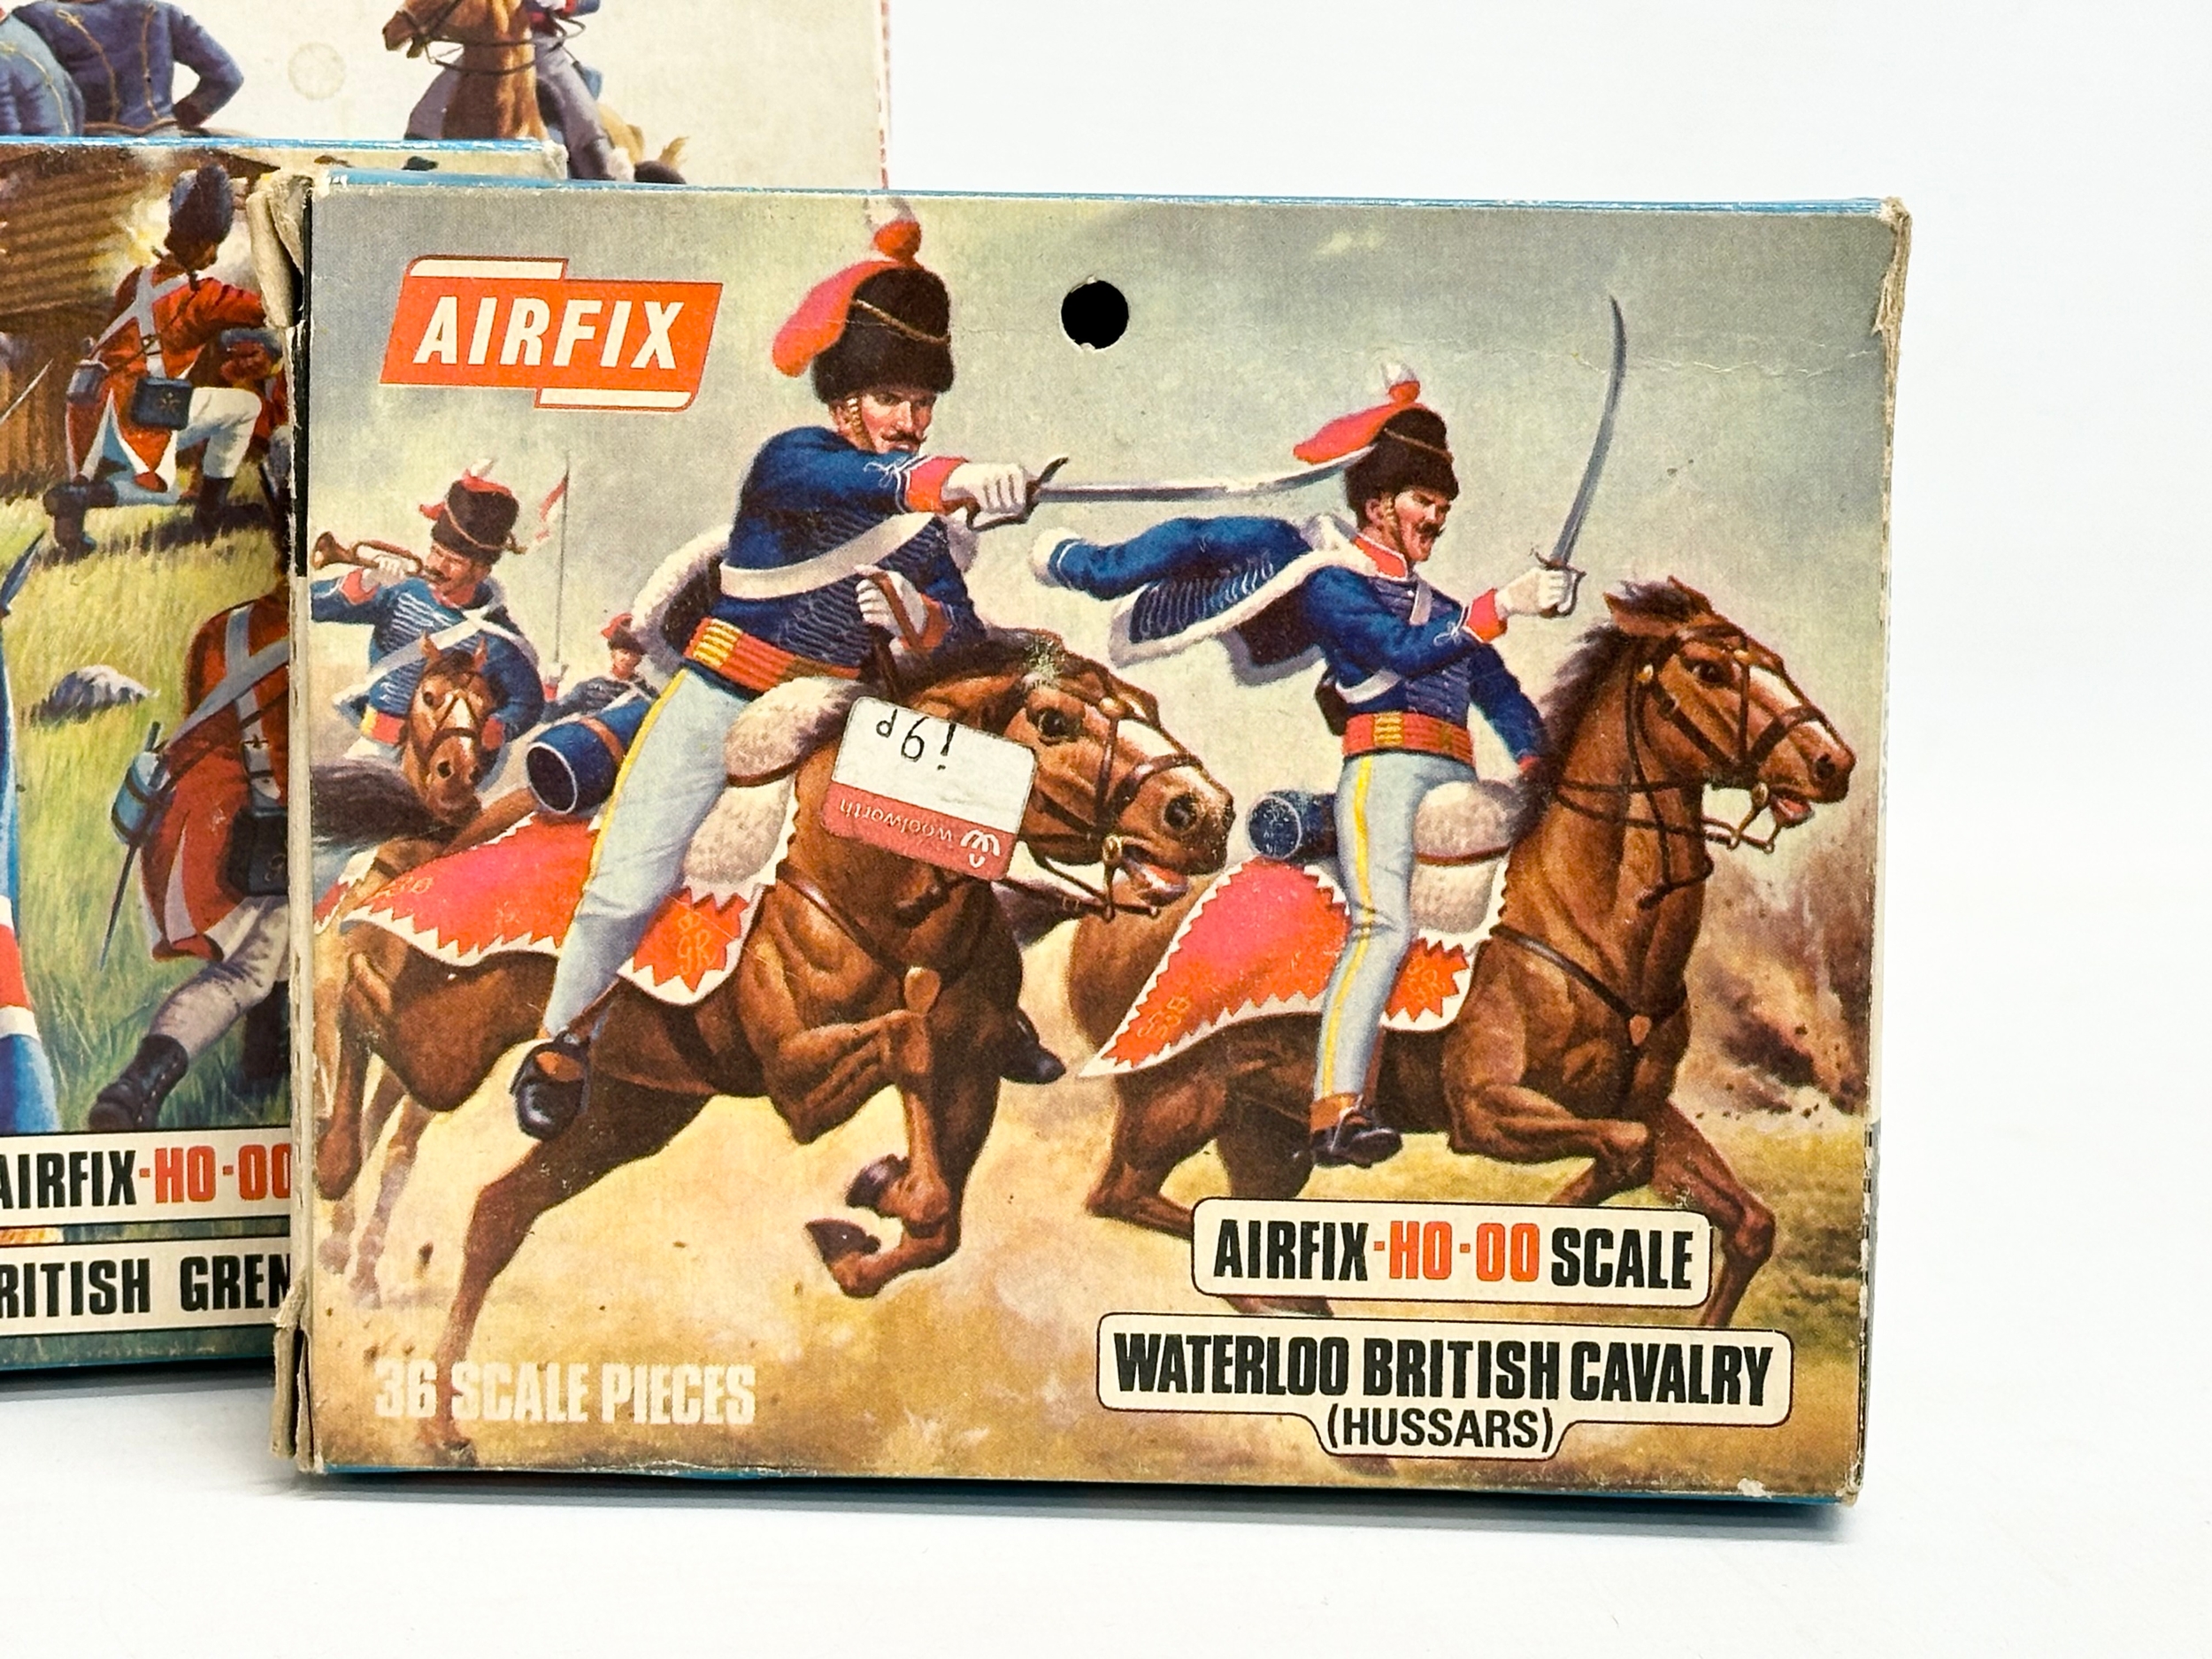 8 boxes of vintage Airfix HO-OO scale British military soldiers. 2 boxes of Airfix American War of - Image 3 of 5